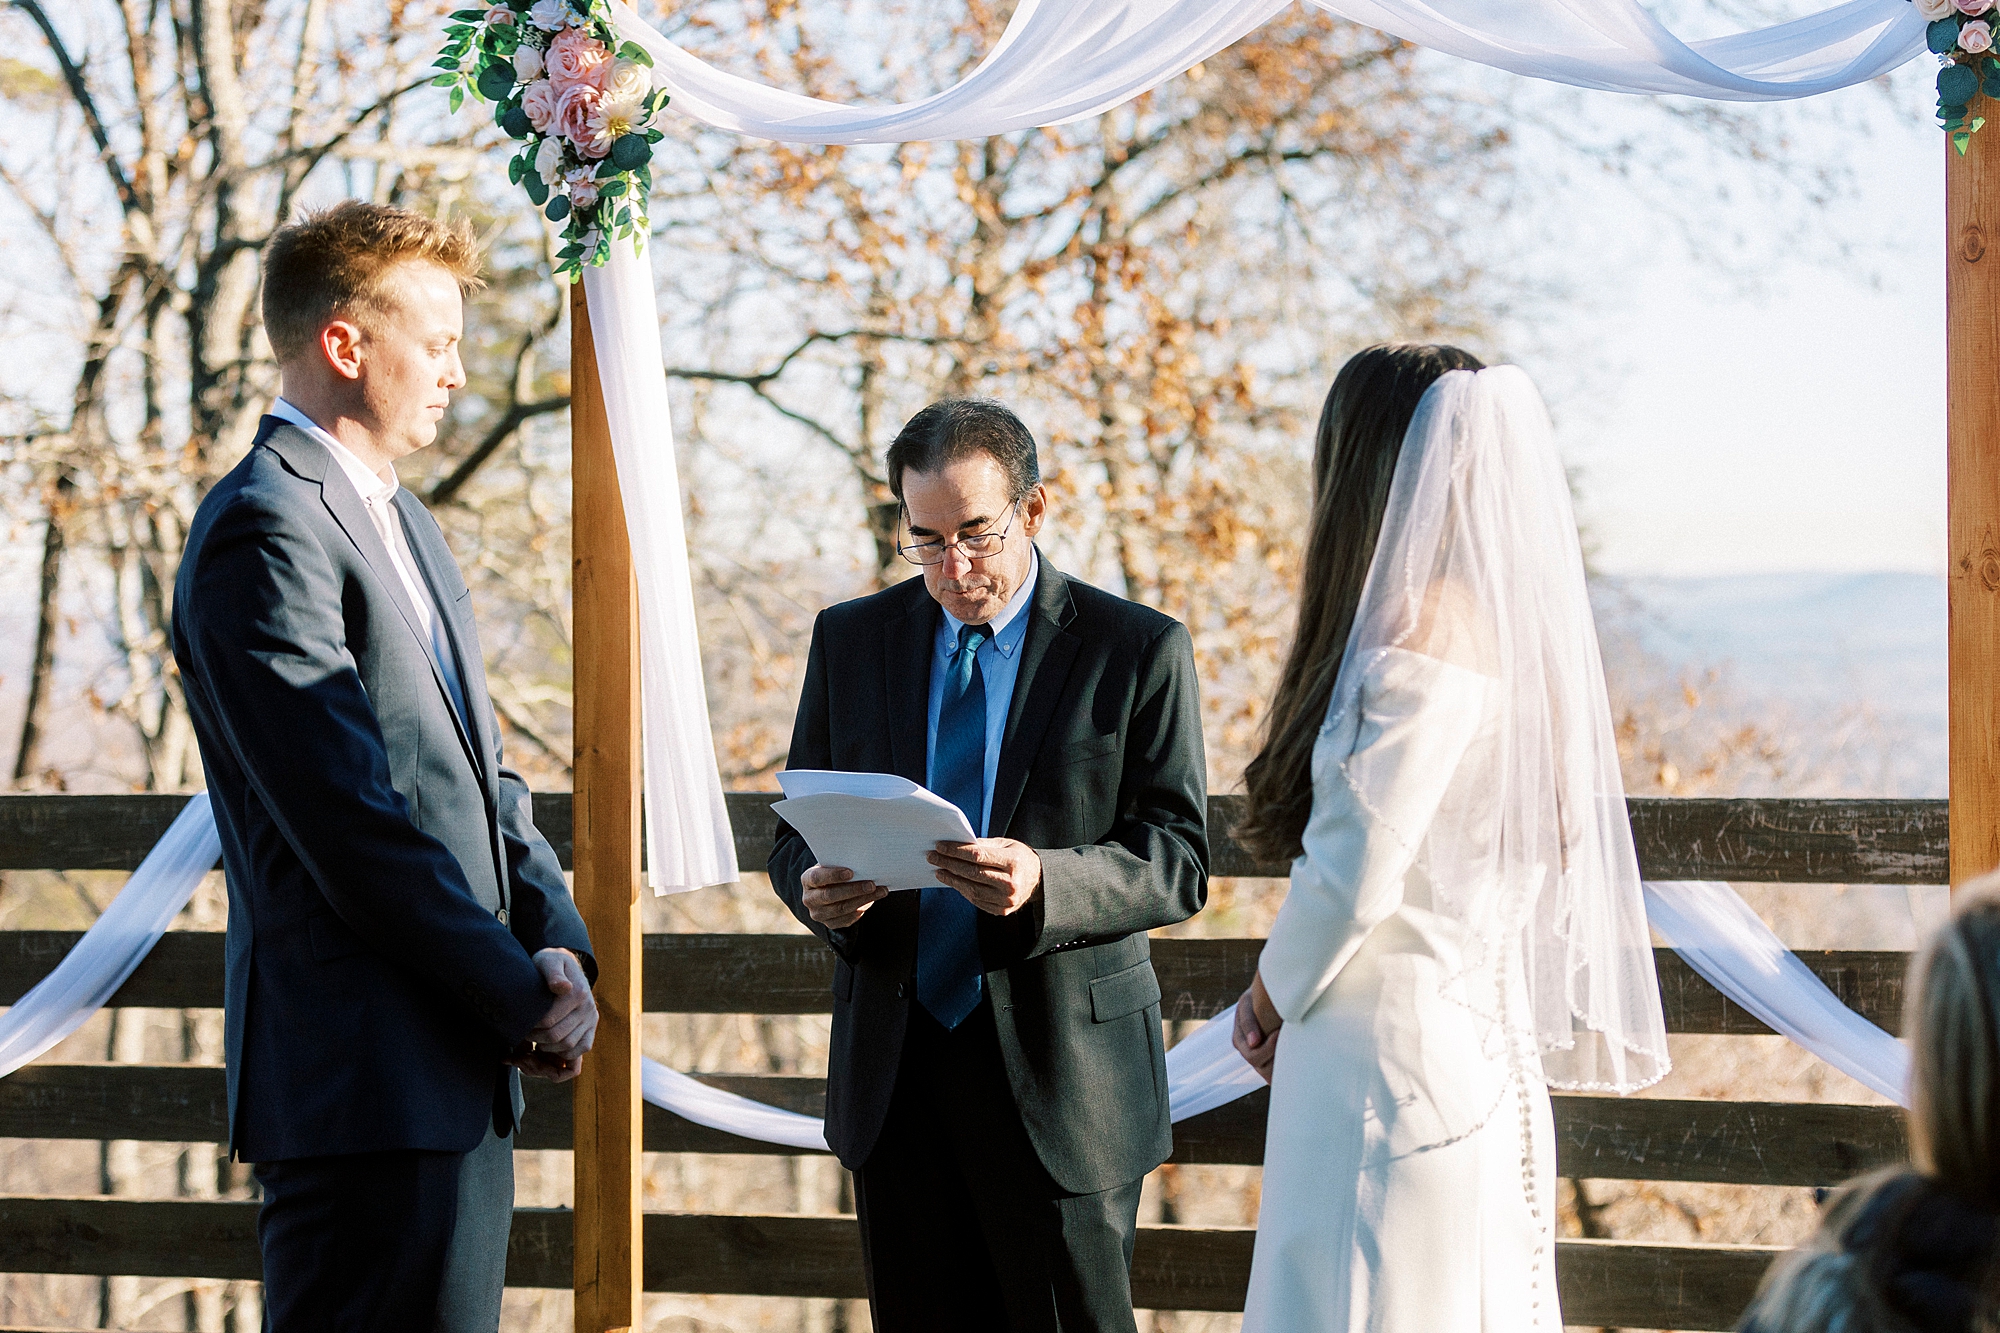 bride and groom exchange vows during ceremony at Morrow Mountain